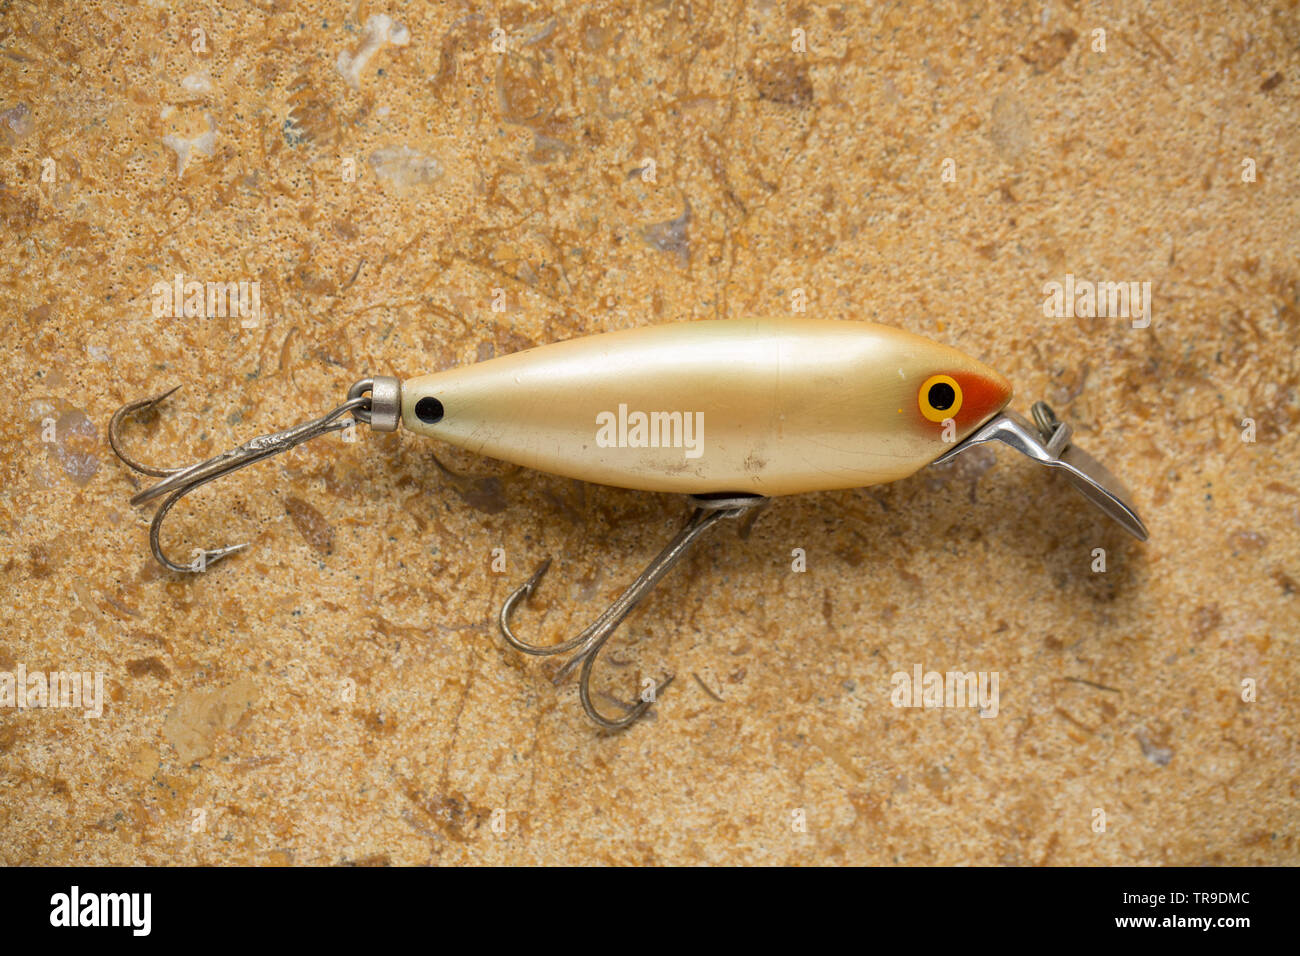 https://c8.alamy.com/comp/TR9DMC/a-vintage-fishing-lure-equipped-with-treble-hooks-photographed-on-a-stone-background-these-type-of-lures-are-often-called-plugs-and-are-designed-to-c-TR9DMC.jpg